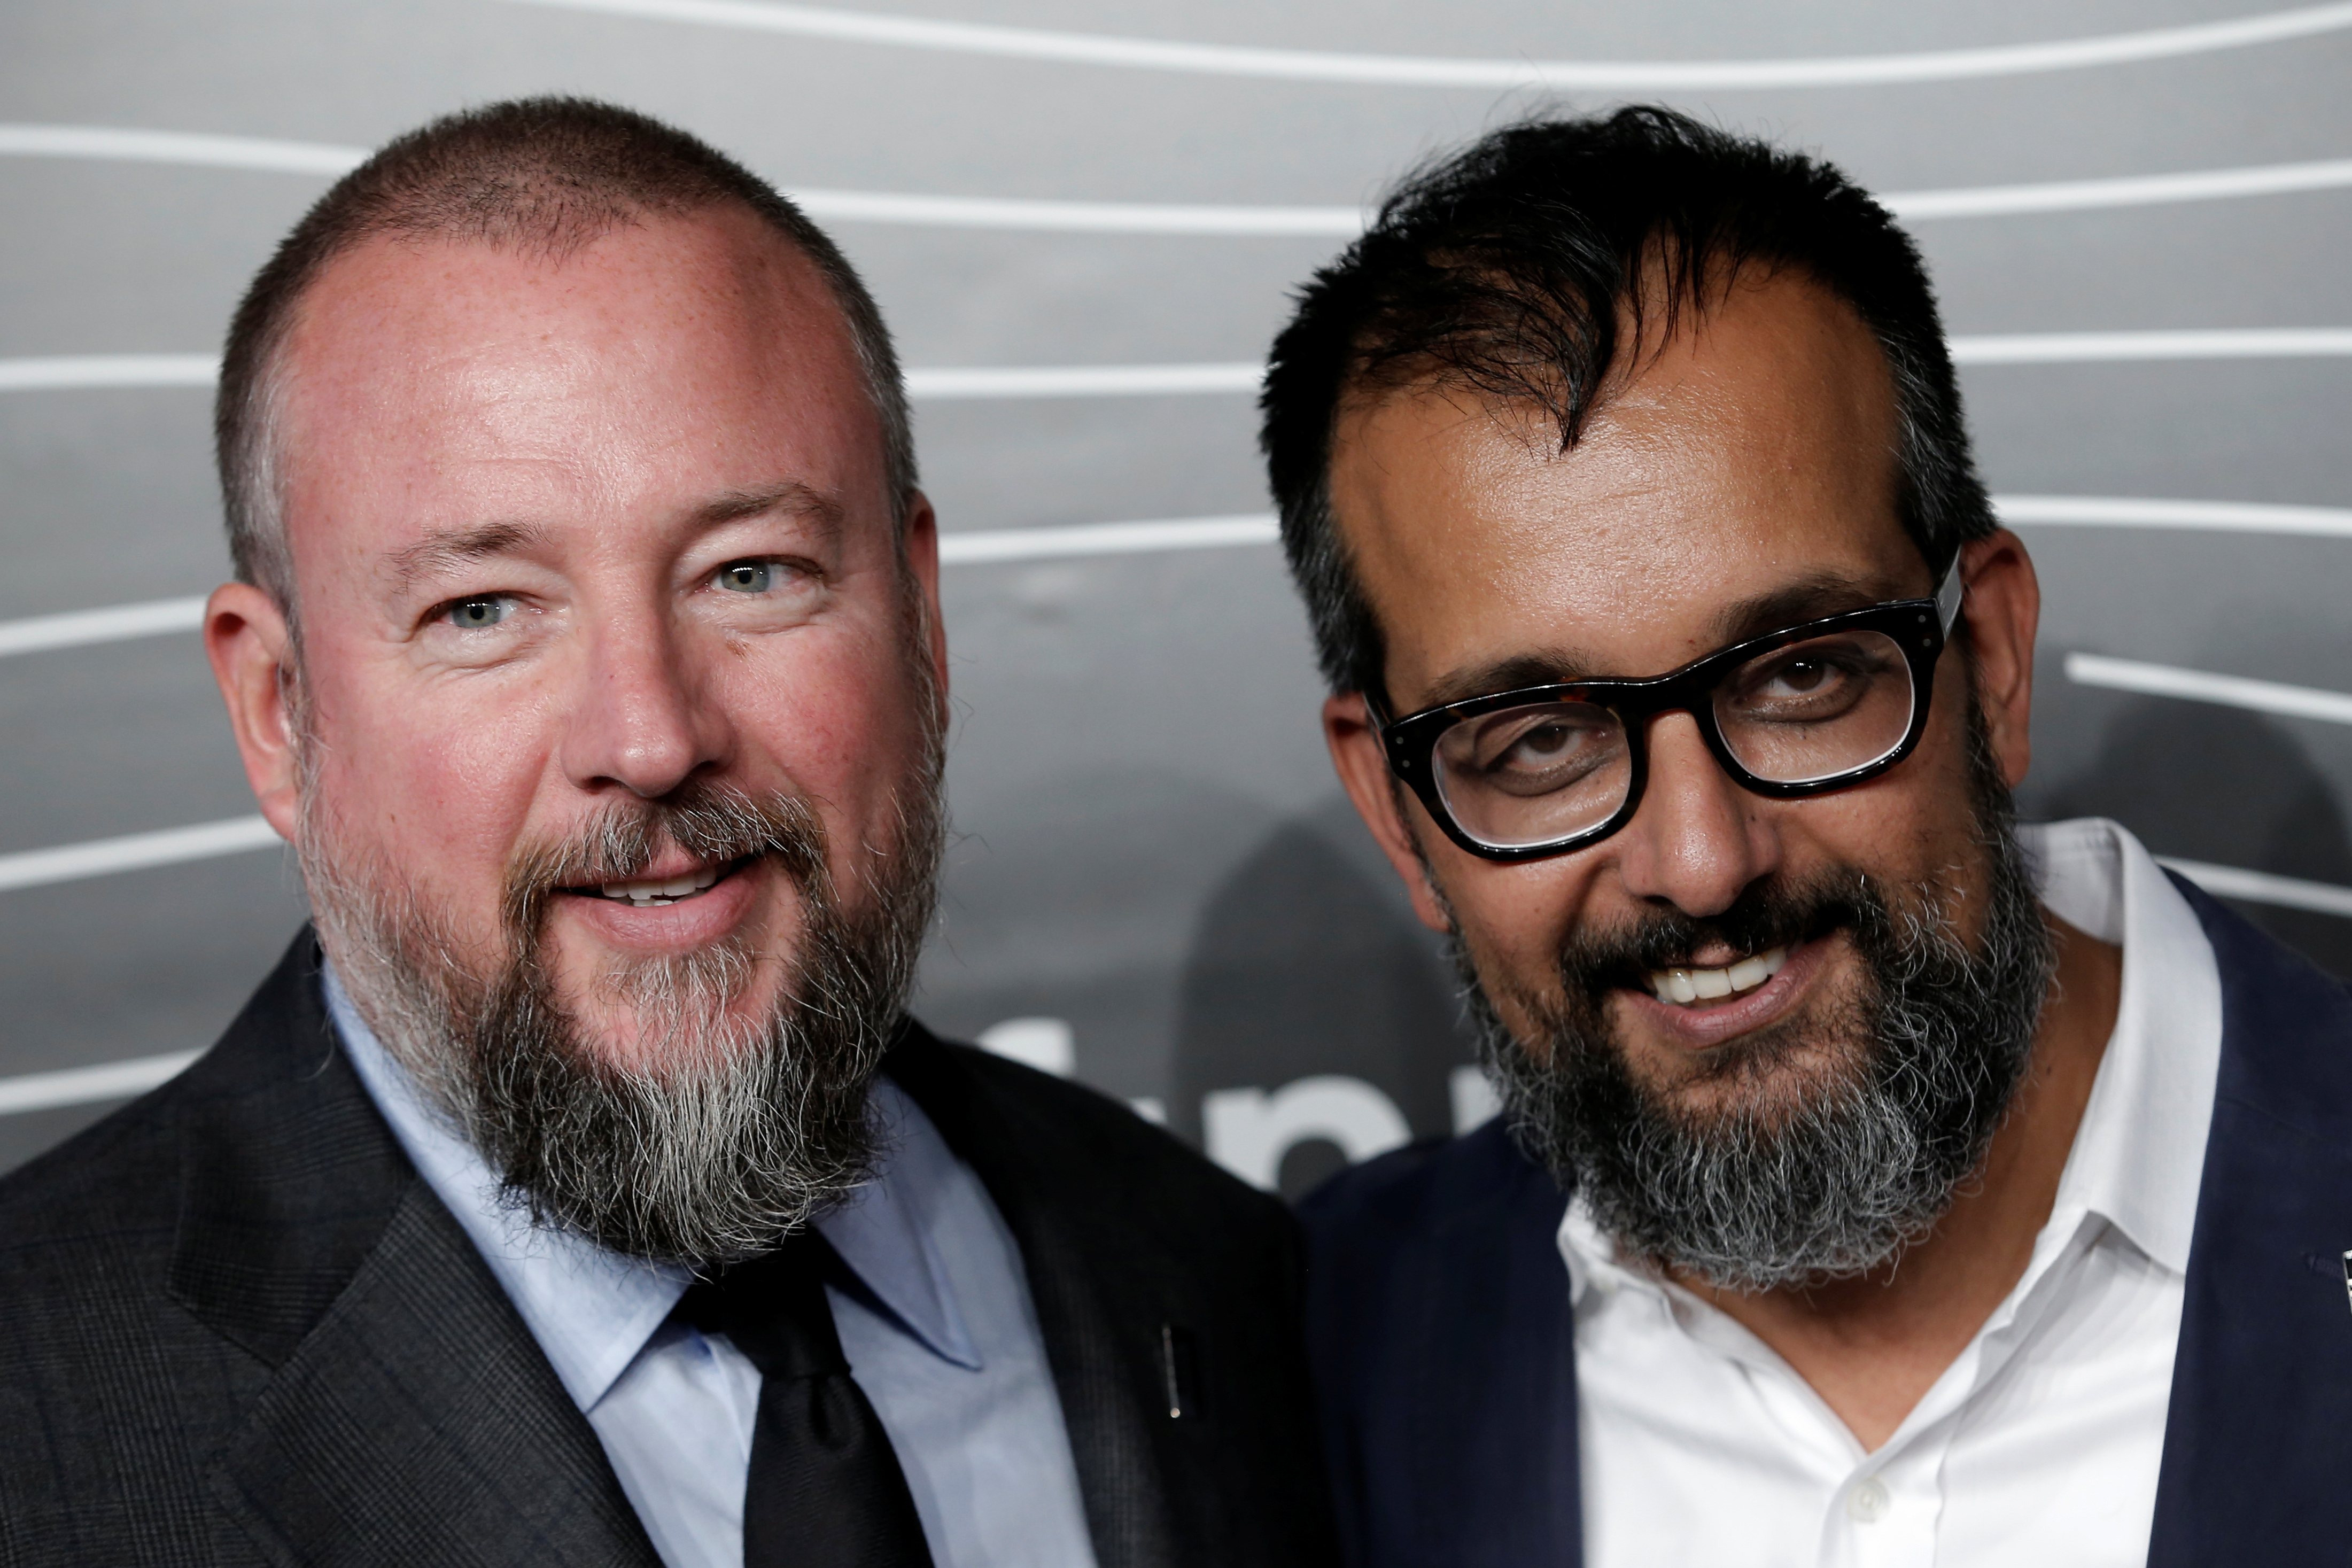 Vice Media files for Chapter 11 bankruptcy to facilitate sale